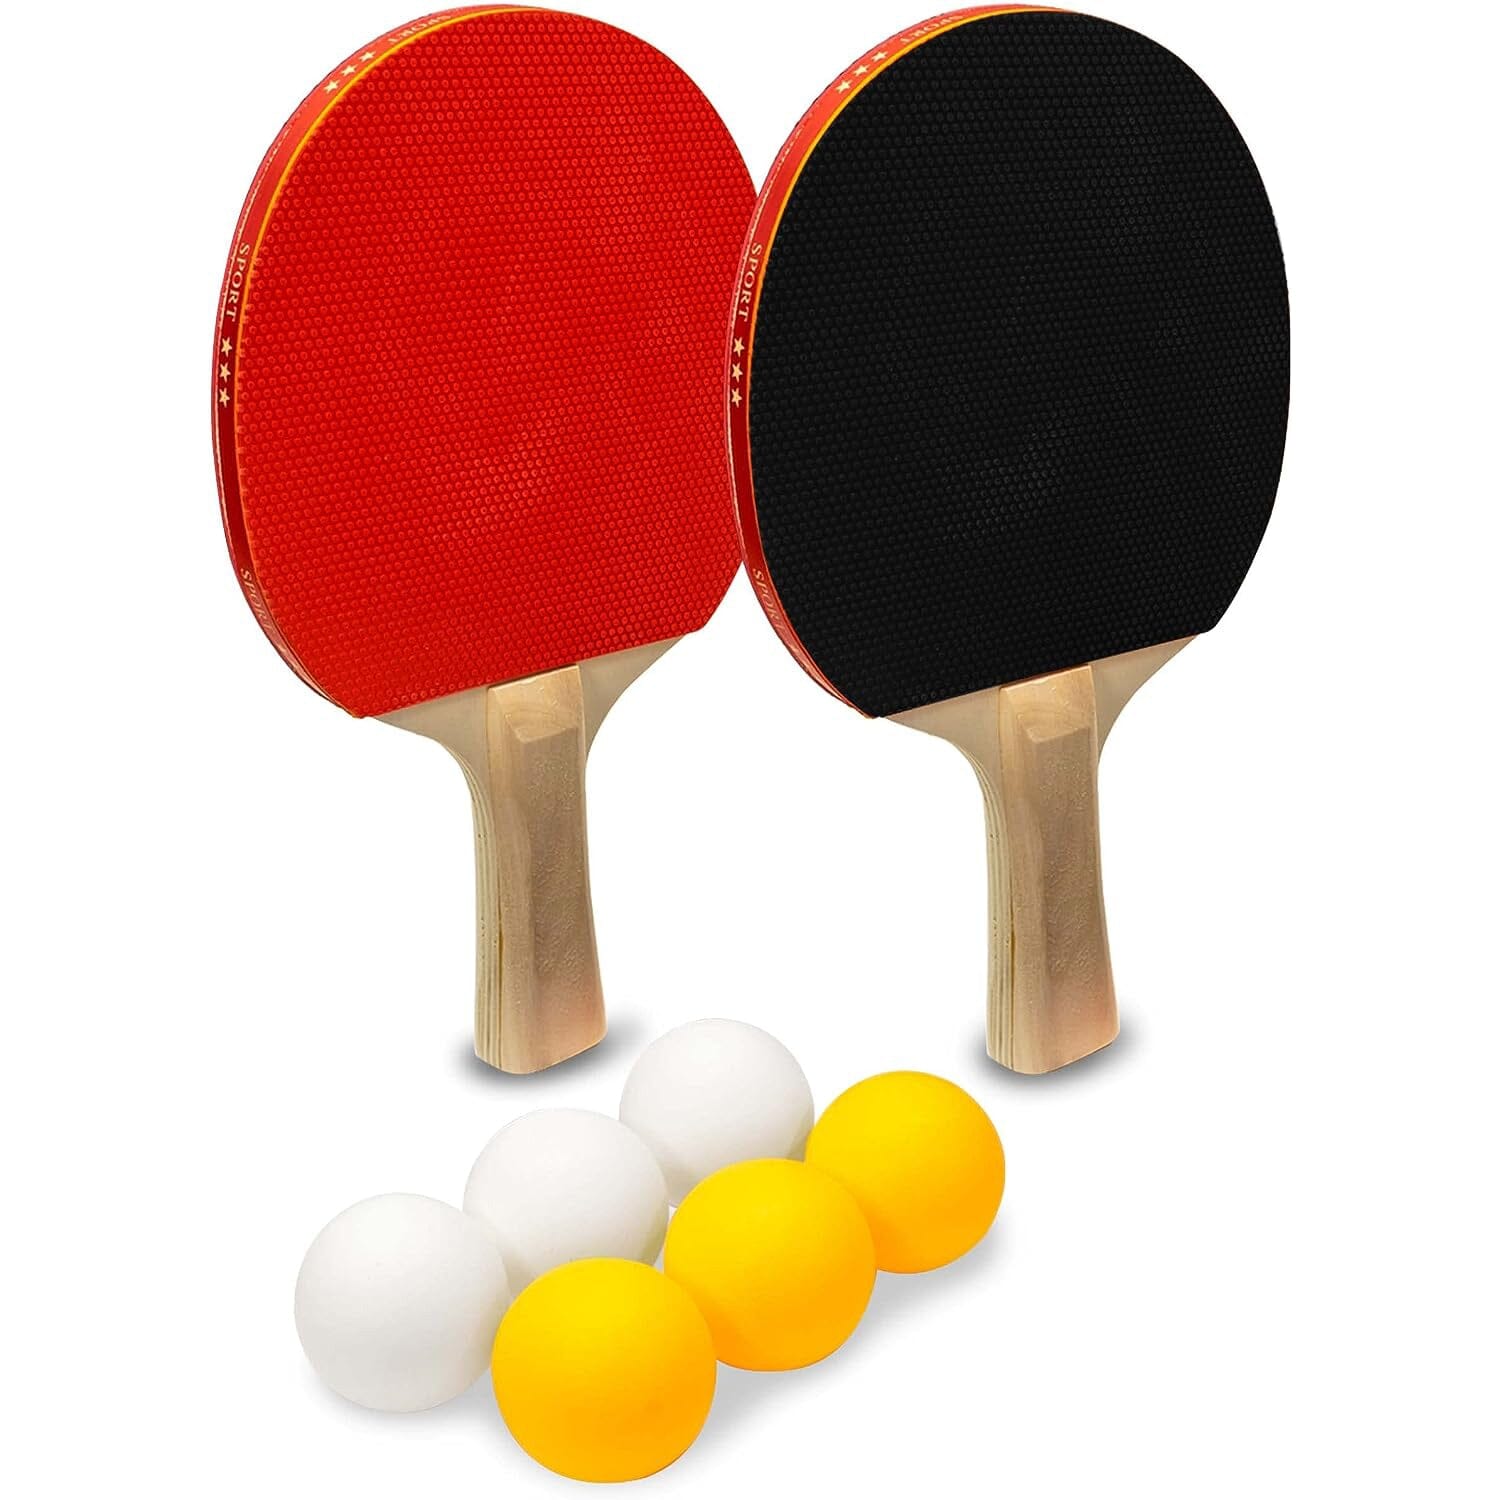 Ping Pong Set with 4 Paddles & Net for Any Table